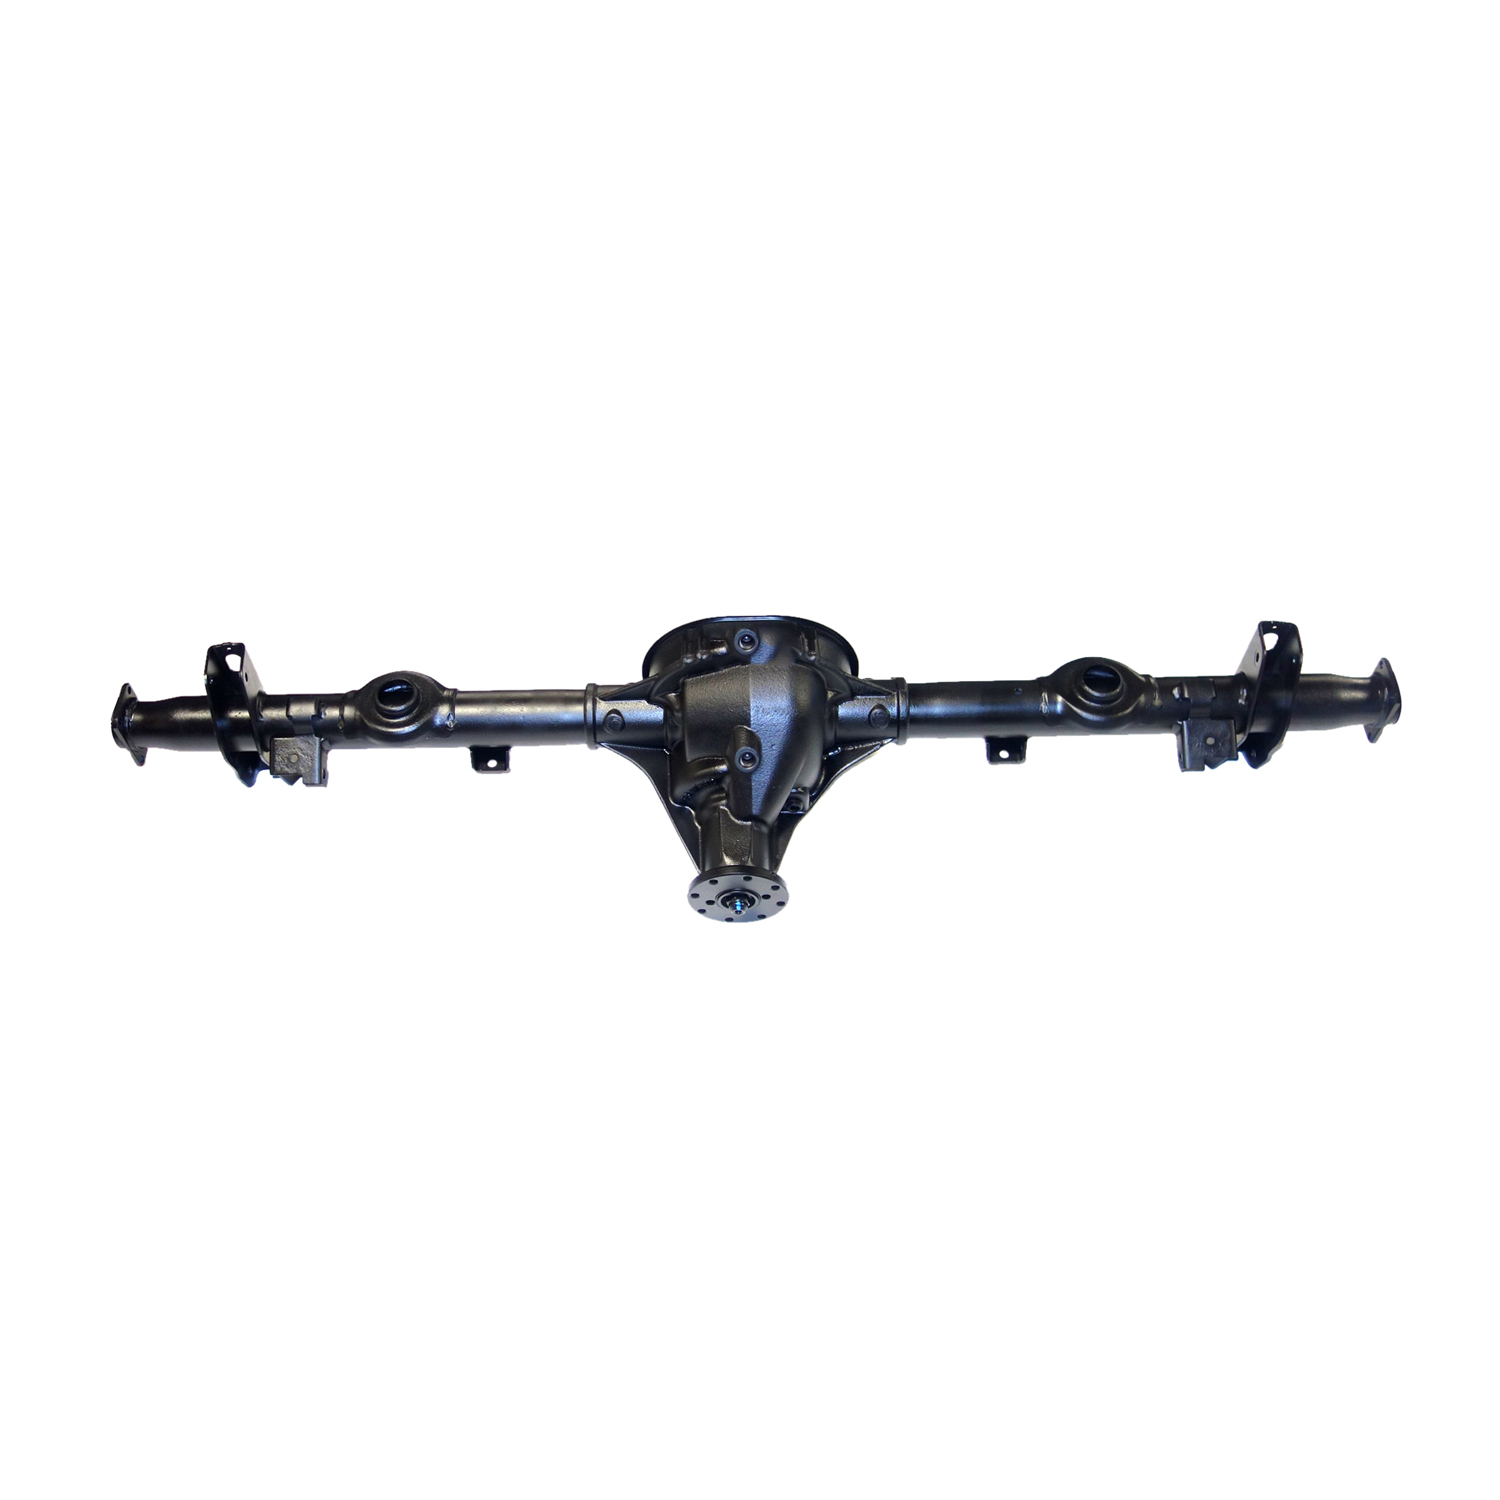 Reman Axle Assembly Ford 8.8" 03-11 Ford Crown Vic 3.27, ABS, Posi